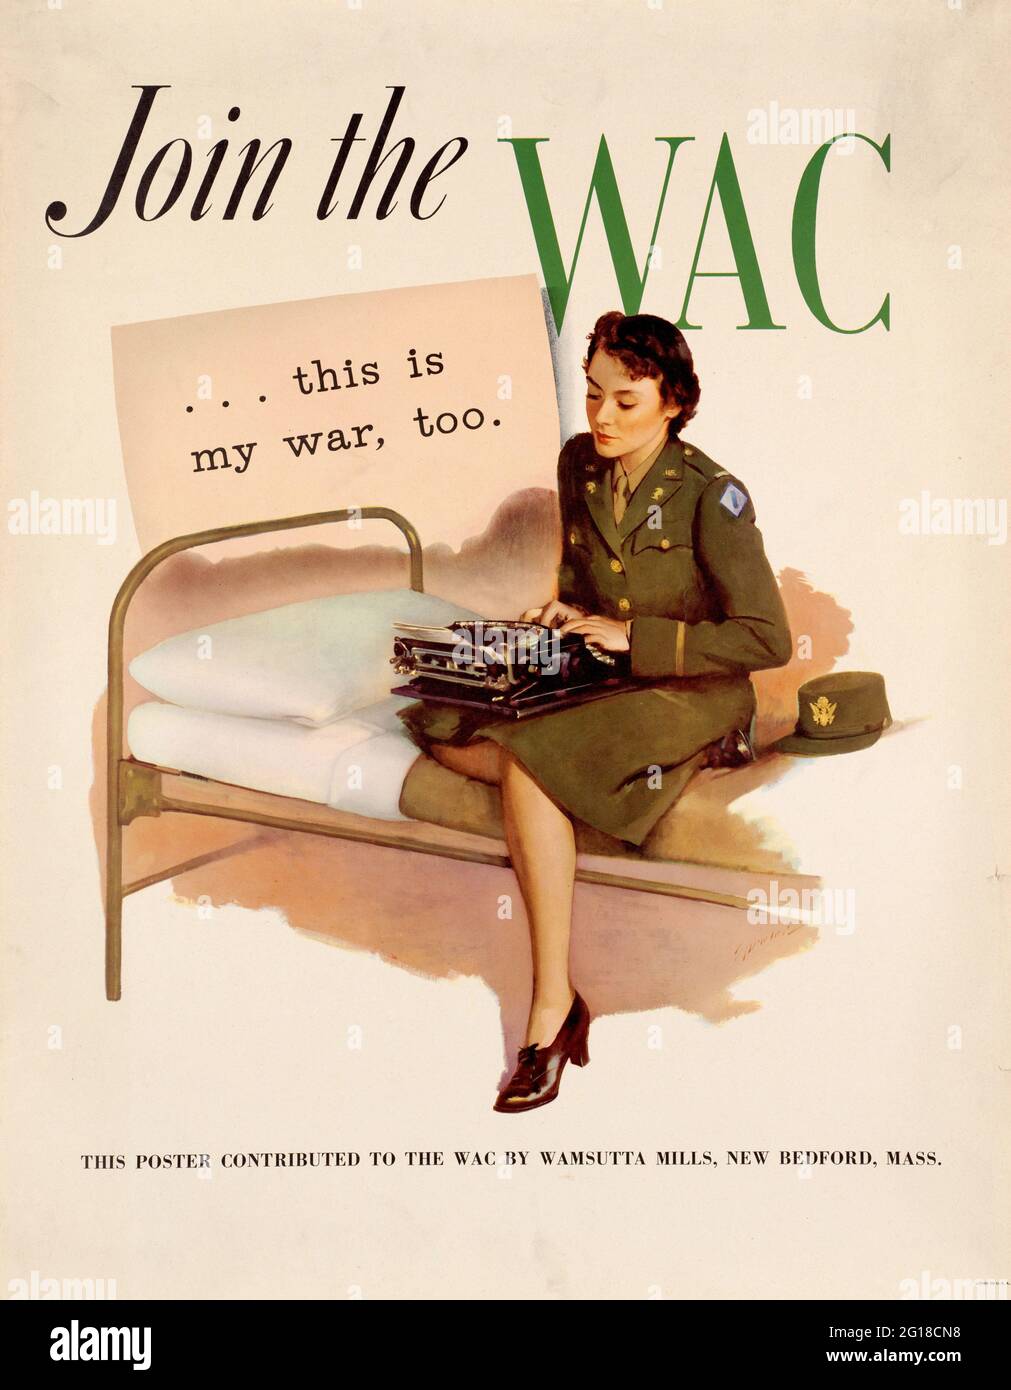 An old WW2 poster advertising the Women's Army Corps (WAC) Stock Photo